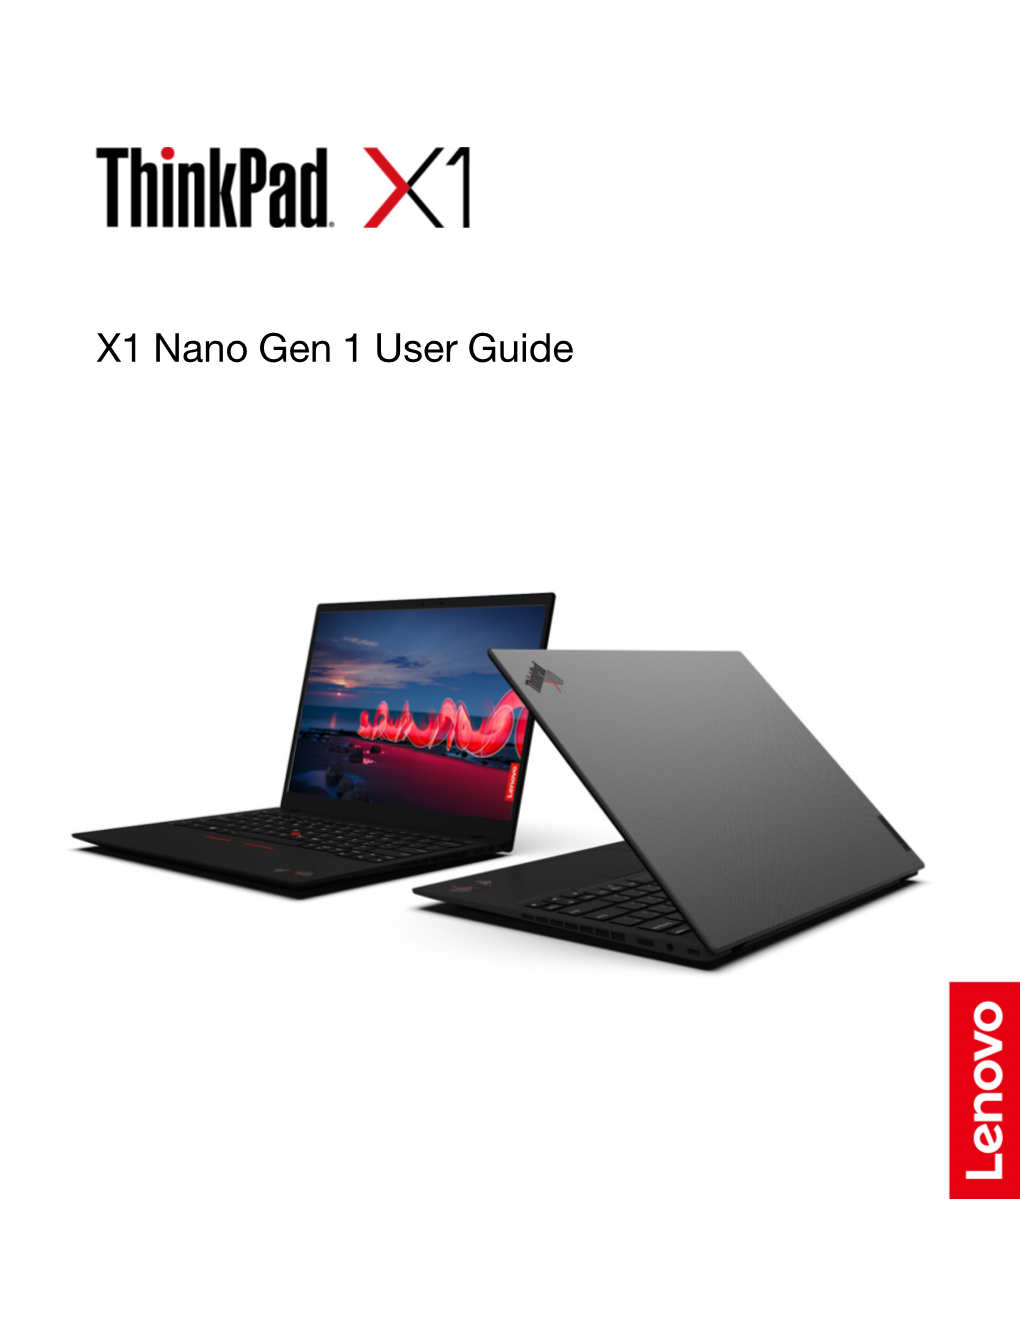 X1 Nano Gen 1 User Guide Read This First